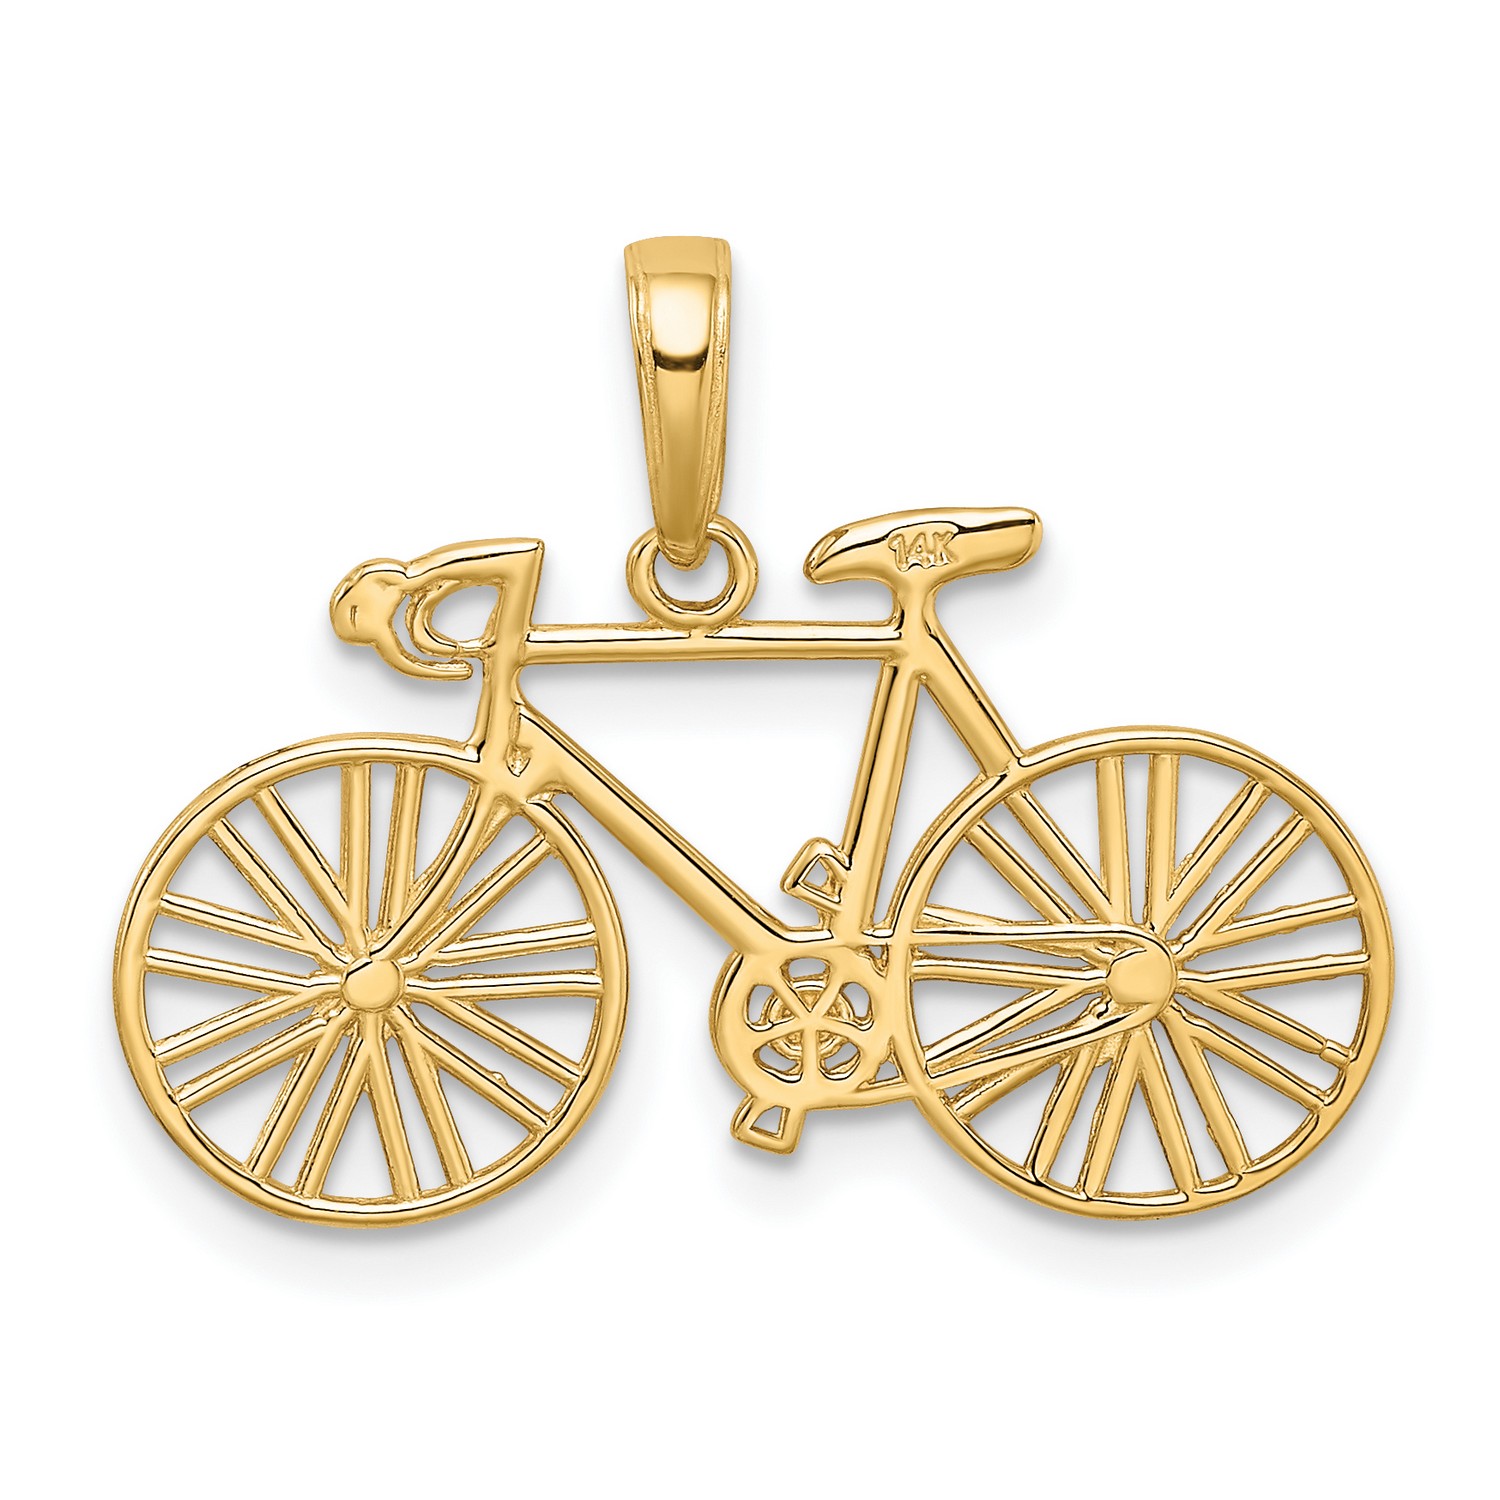 Details about  / New Real Solid 14K Gold 3D 10-Speed Bicycle Charm Pendant